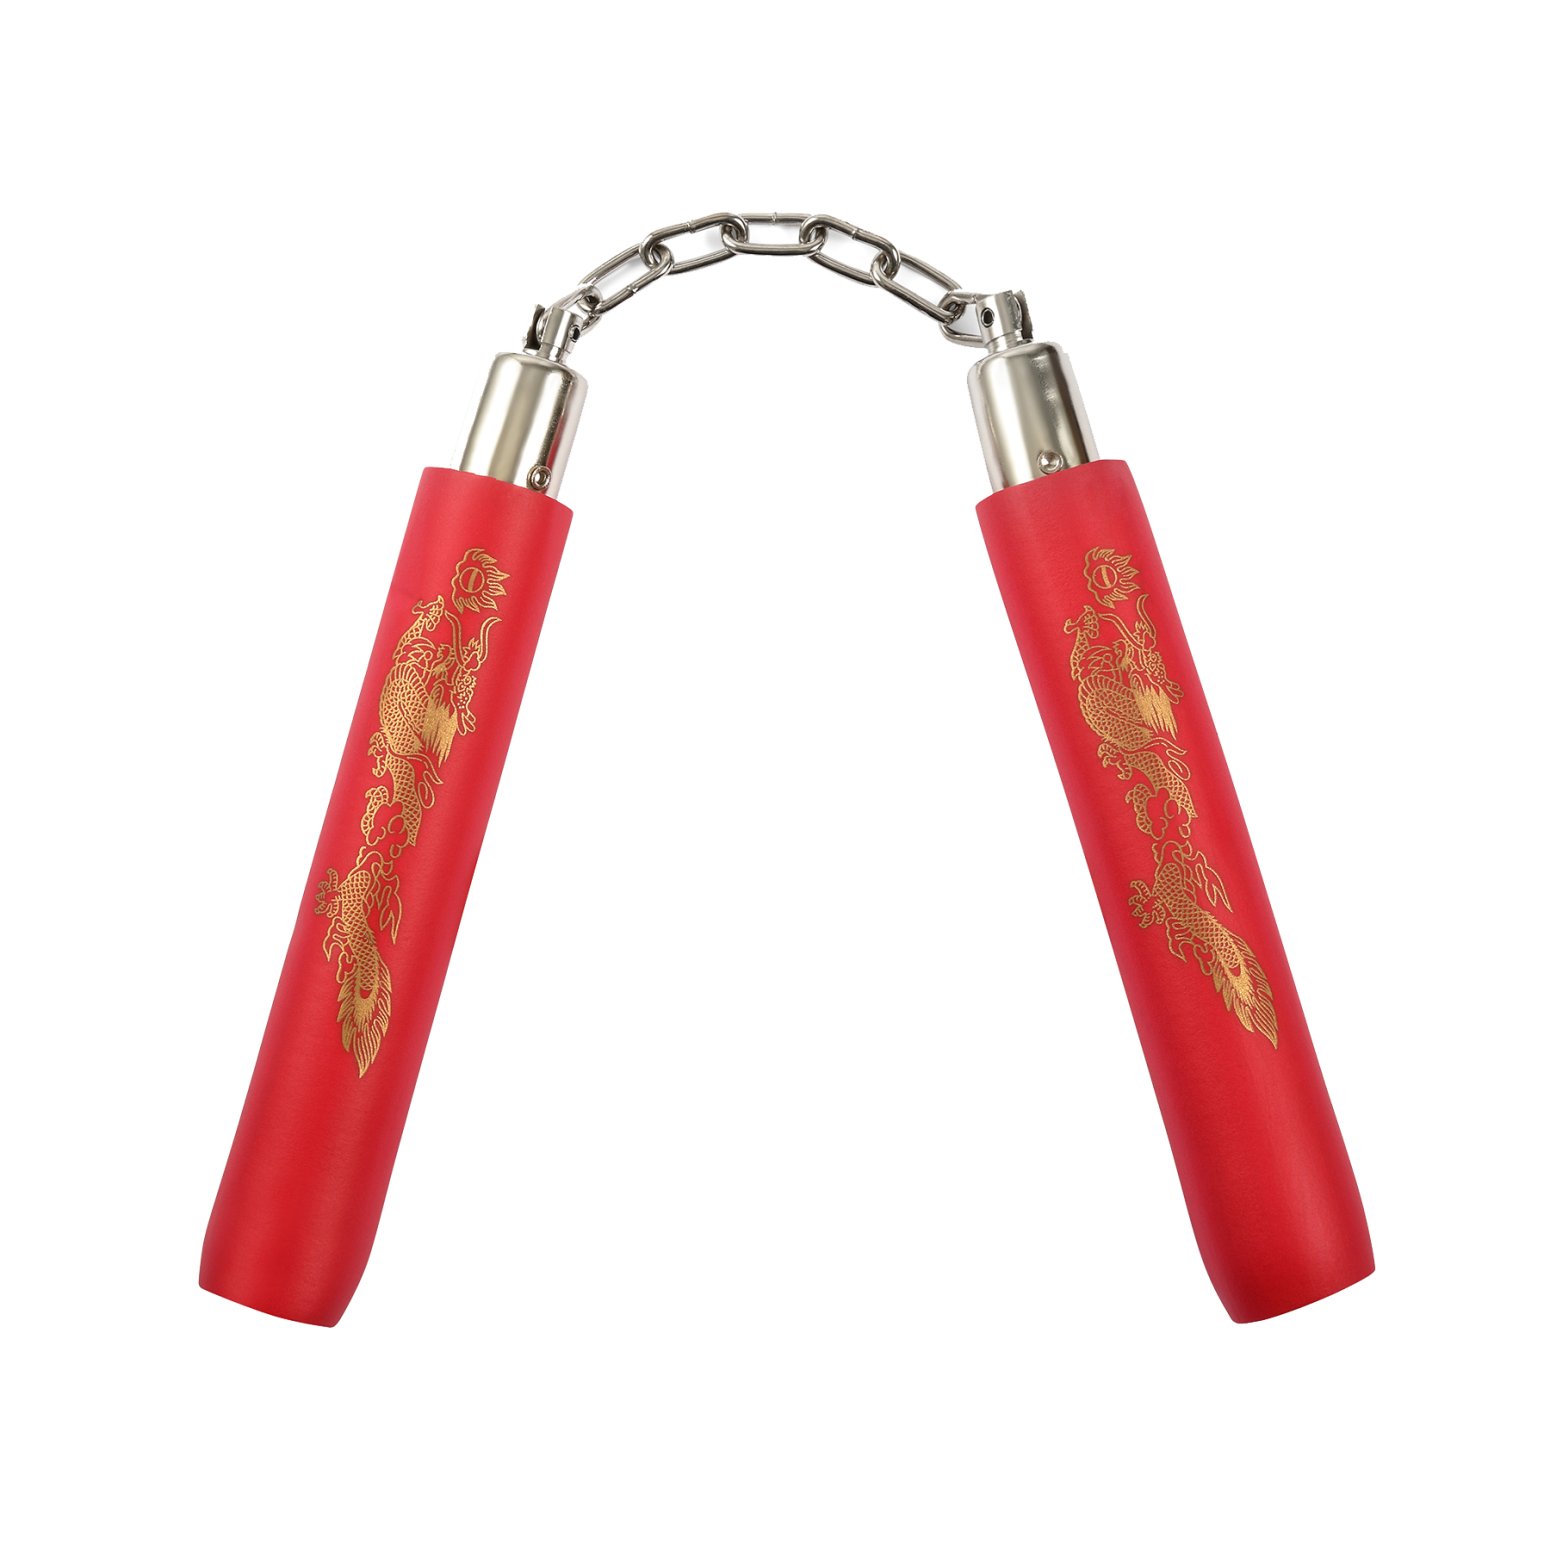 NR-019: 8 in Foam with ball bearing chain: All Red - Click Image to Close